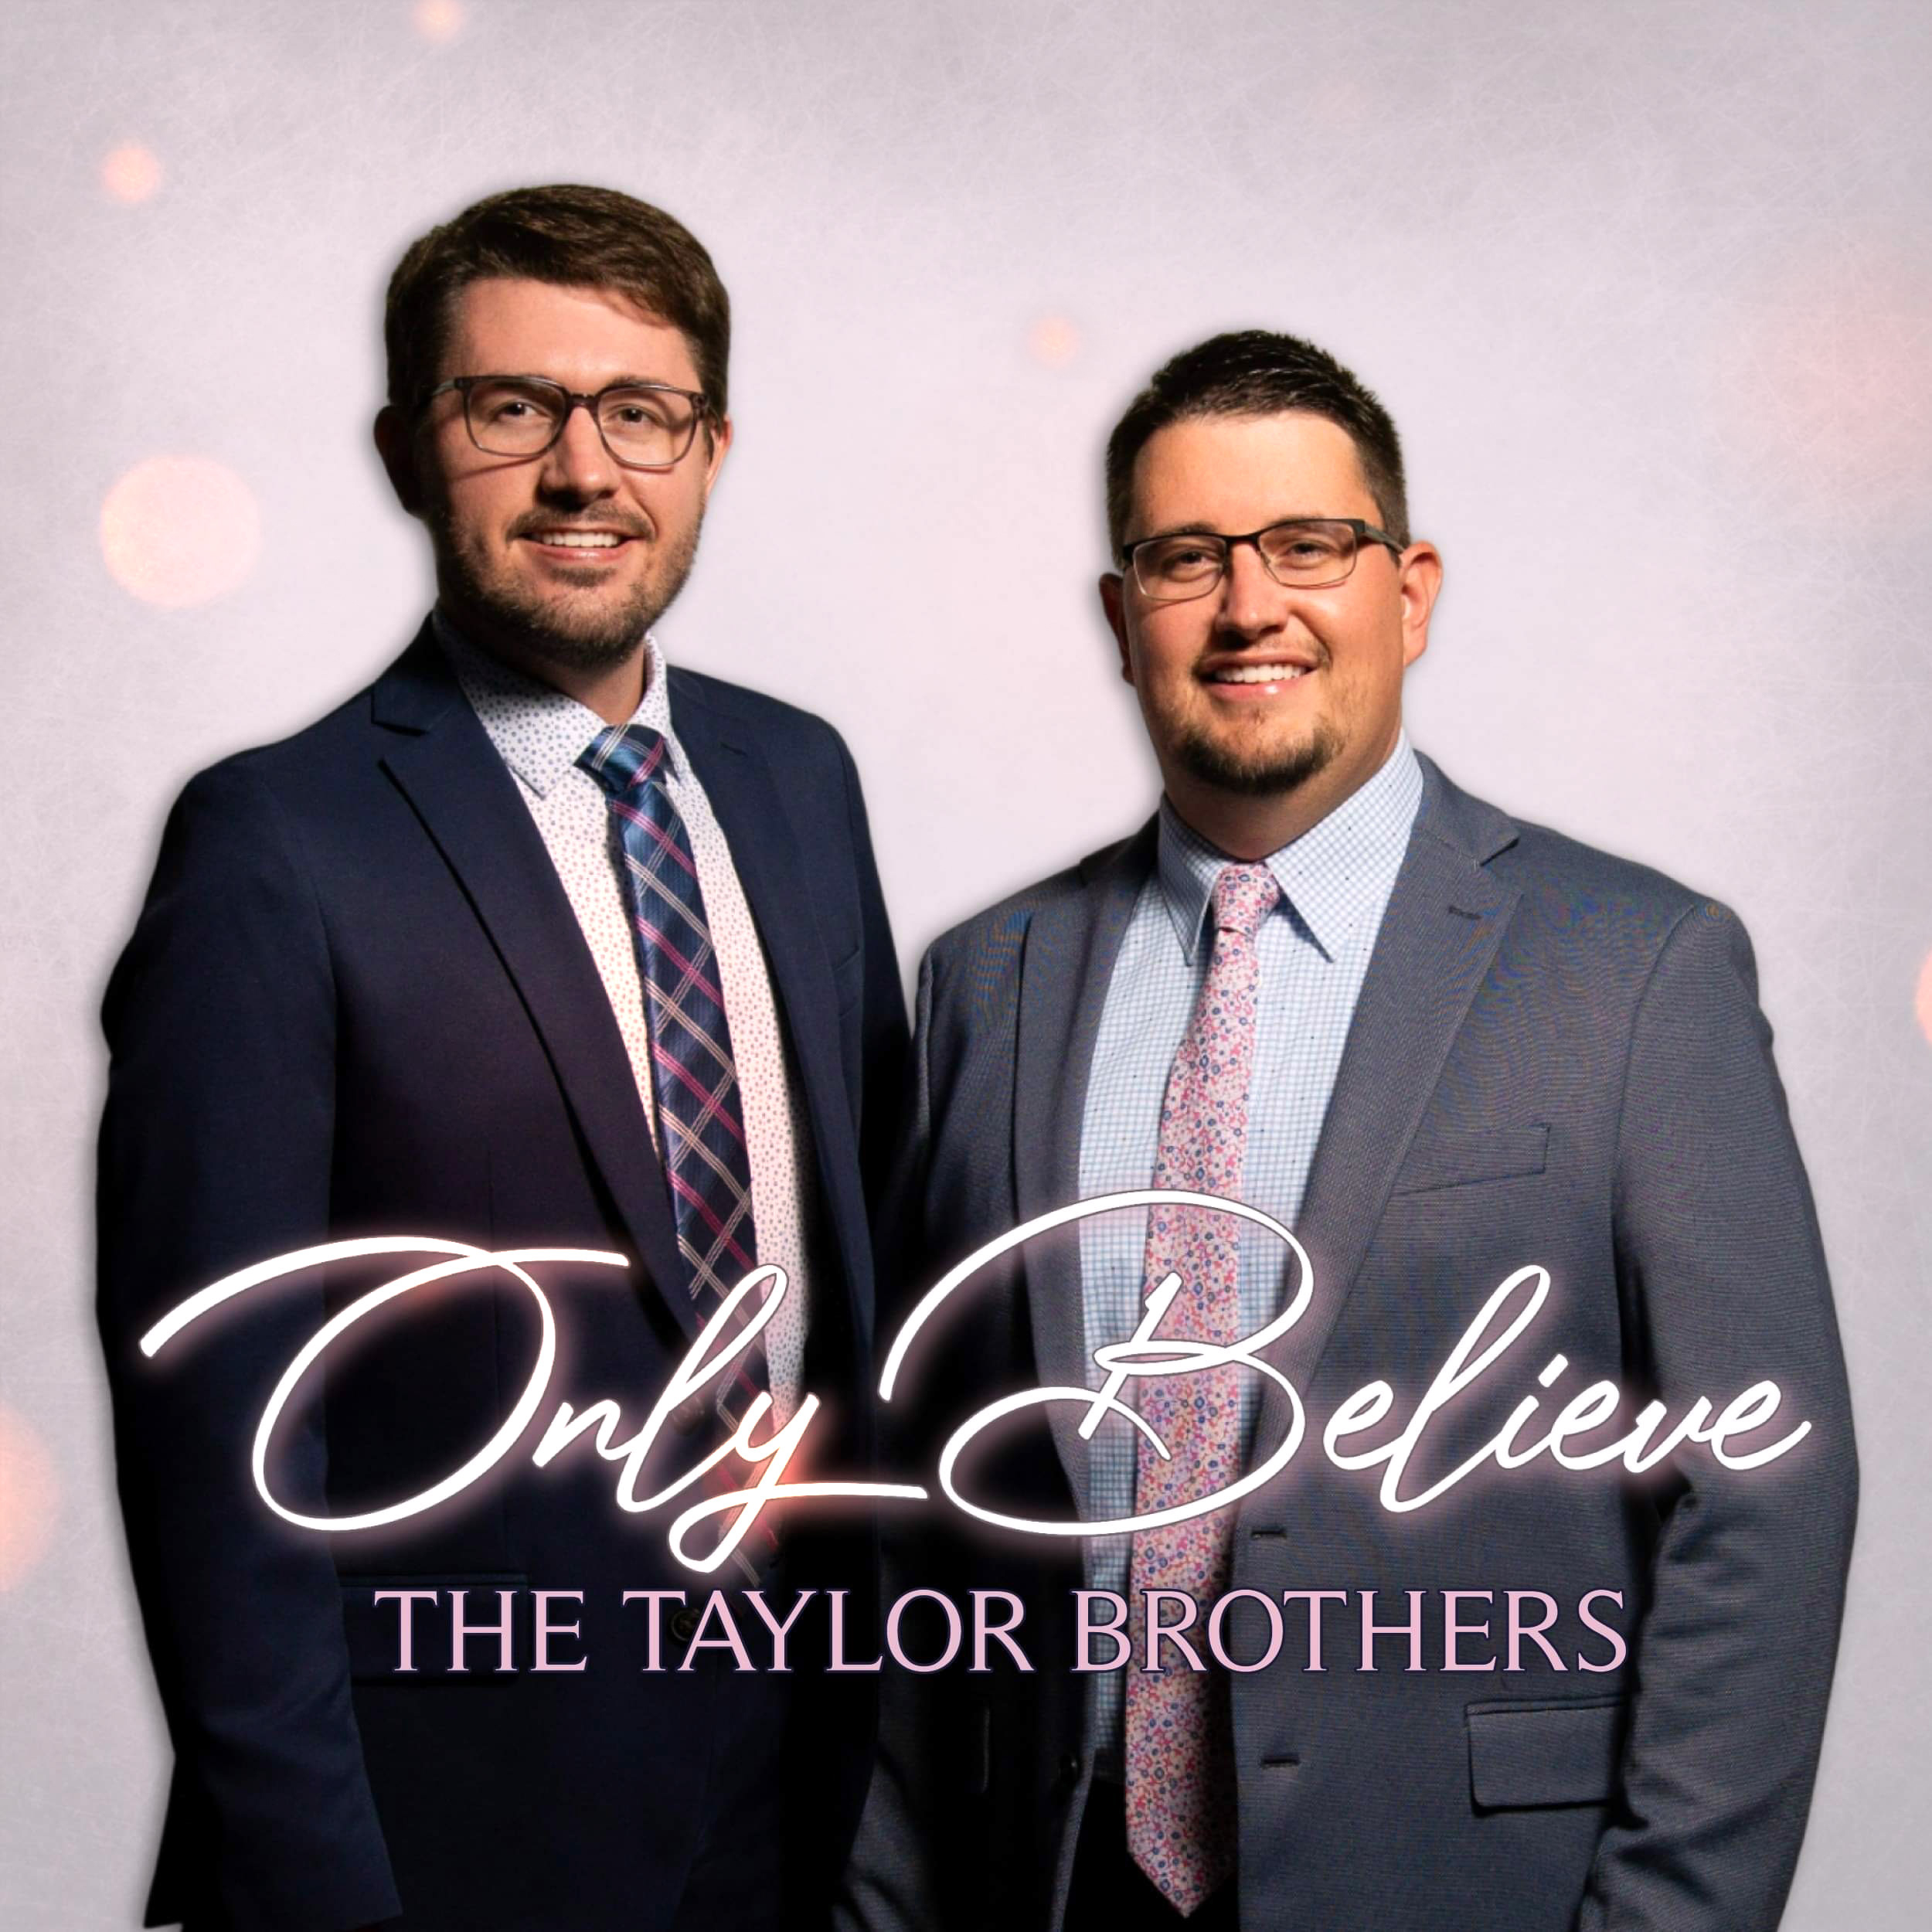 The Taylor Brothers